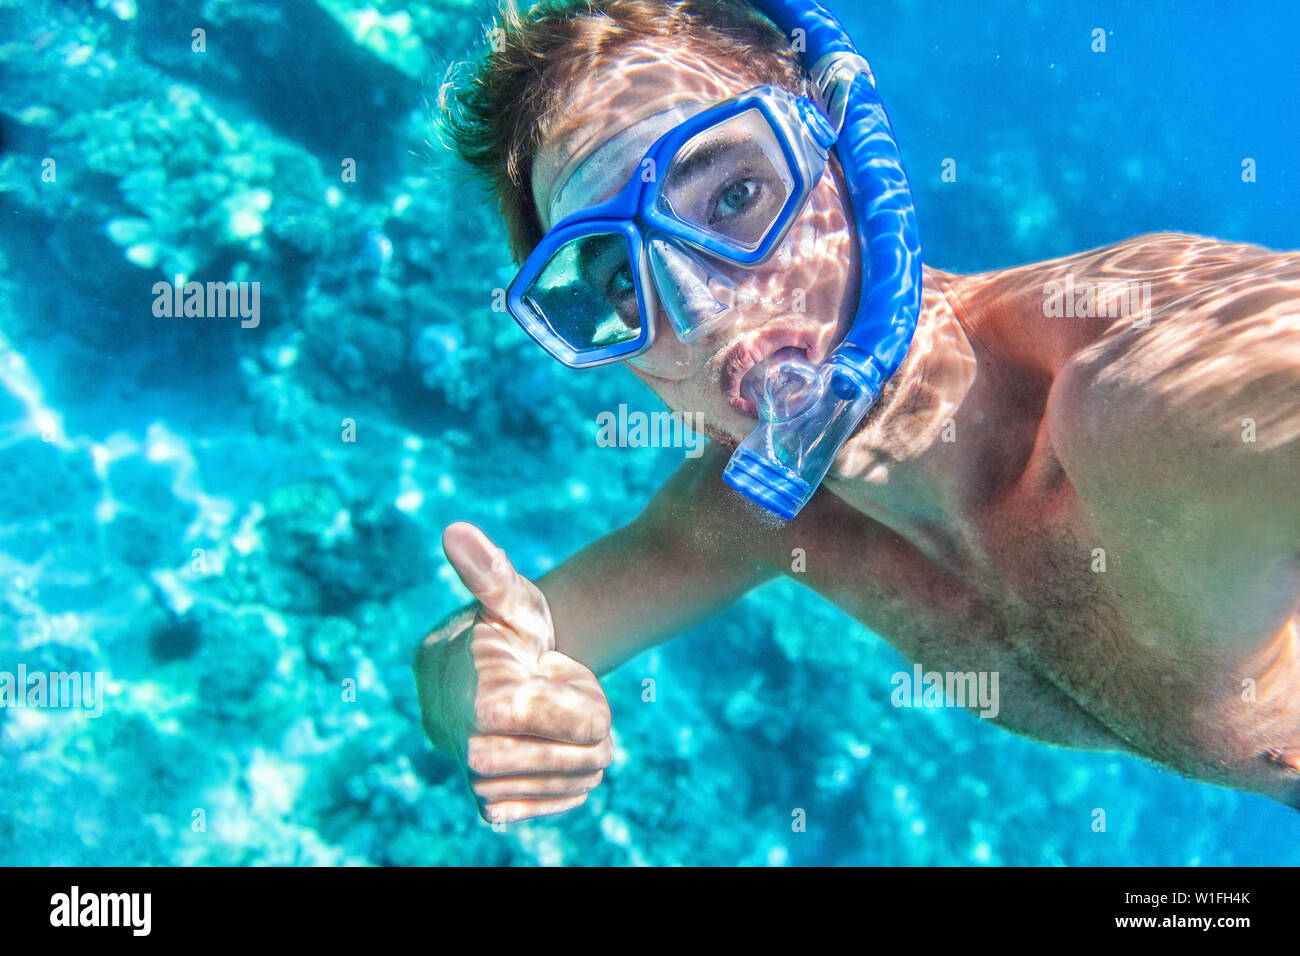 Snorkeling man underwater giving thumbs up ok signal wearing snorkel and mask having fun on beach summer holidays vacation enjoying recreational leisure time swimming in the sea. Stock Photo